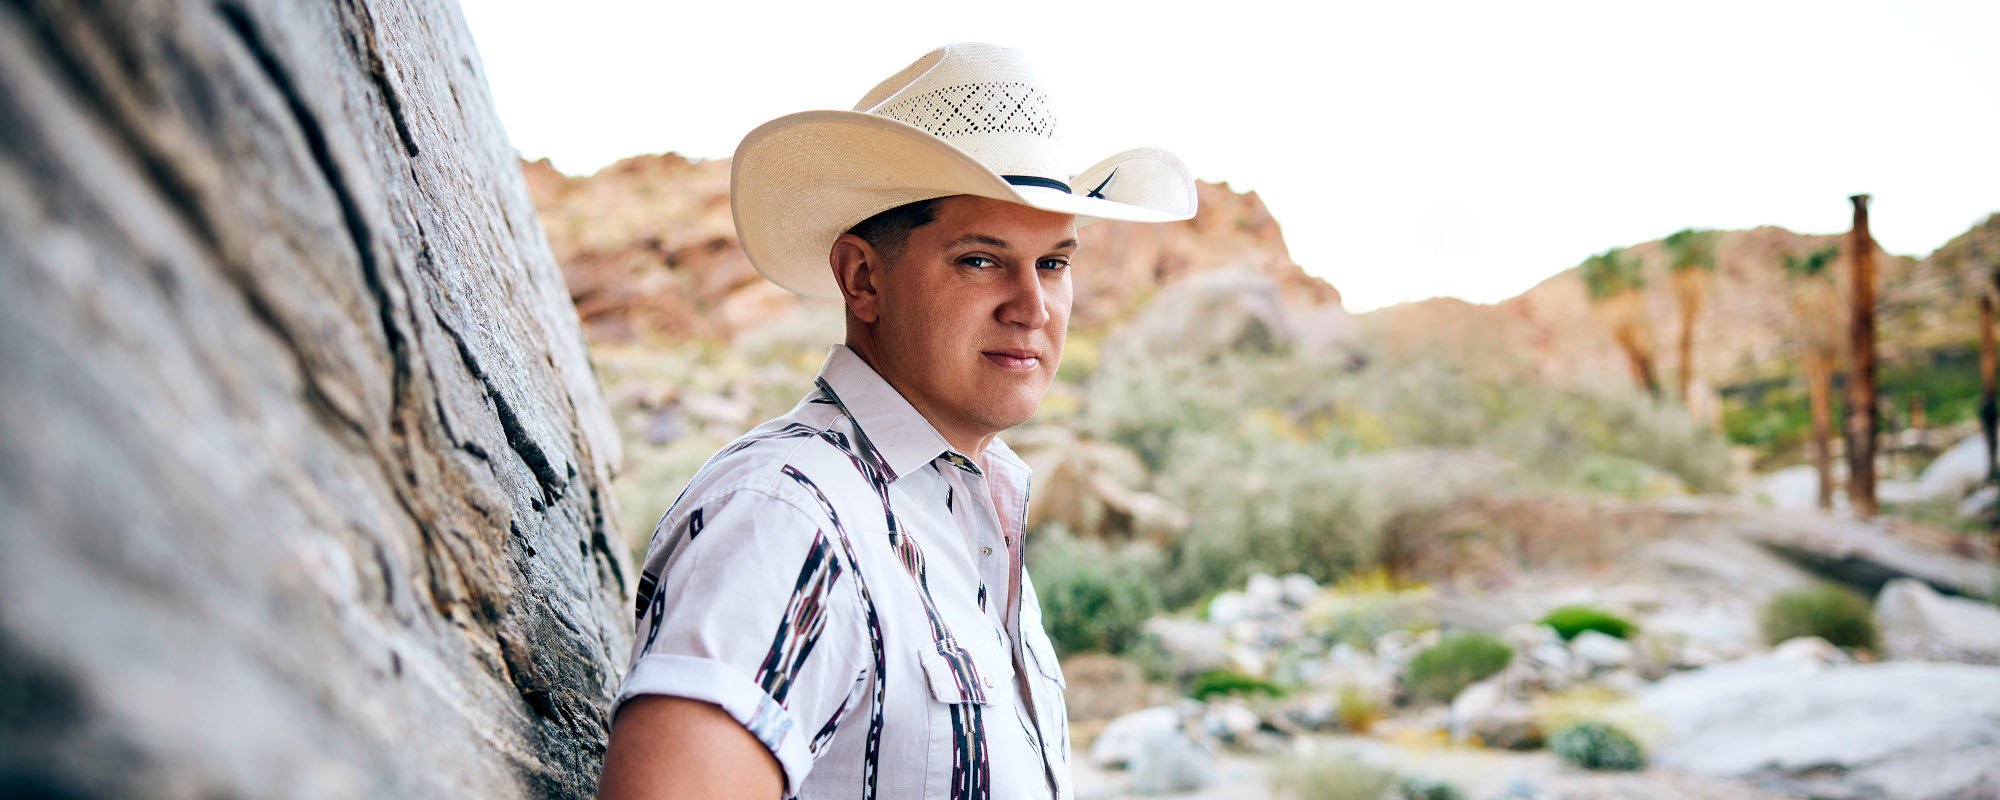 Jon Pardi Reaches No. 1 with “Your Heart or Mine”